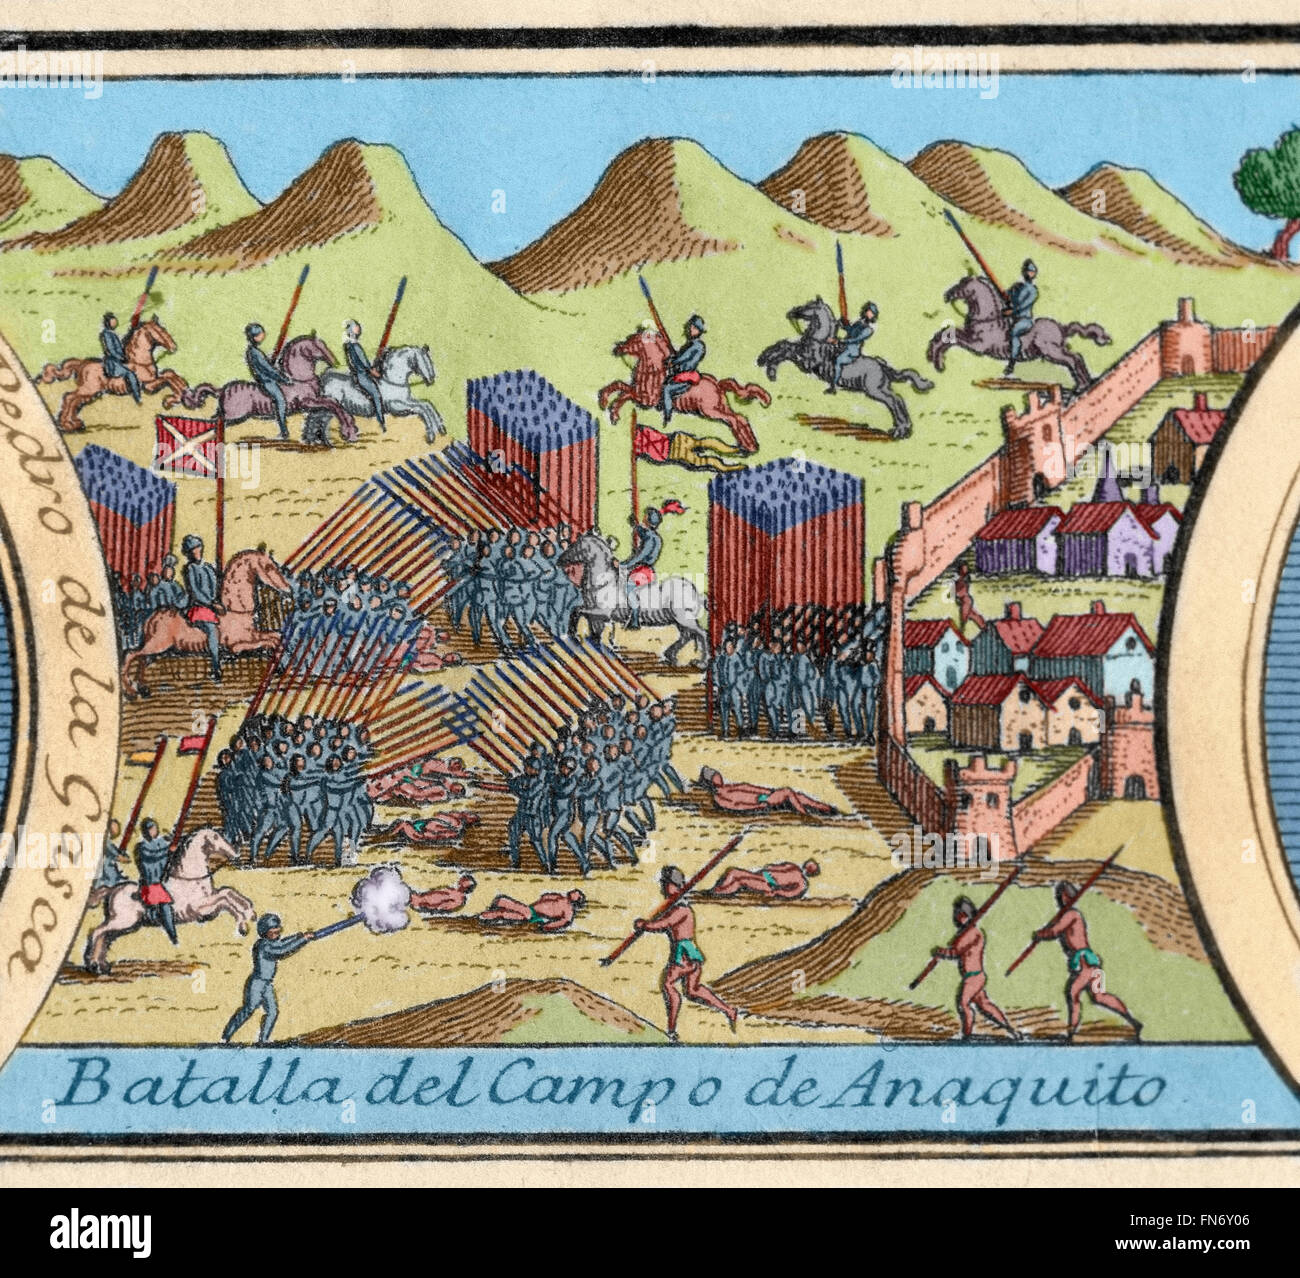 Spanish Conquest of Peru. Battle of Anaquito or Inaquito (1546), outskirts of present-day Quito, between Nueva Castilla and Viceroyalty of Peru leaded by Gonzalo Pizarro (1502-1548) and Blasco Nuñez Vela (d. 1546) with victory for Nueva Castilla. Engraving, 1726. Colored. Stock Photo